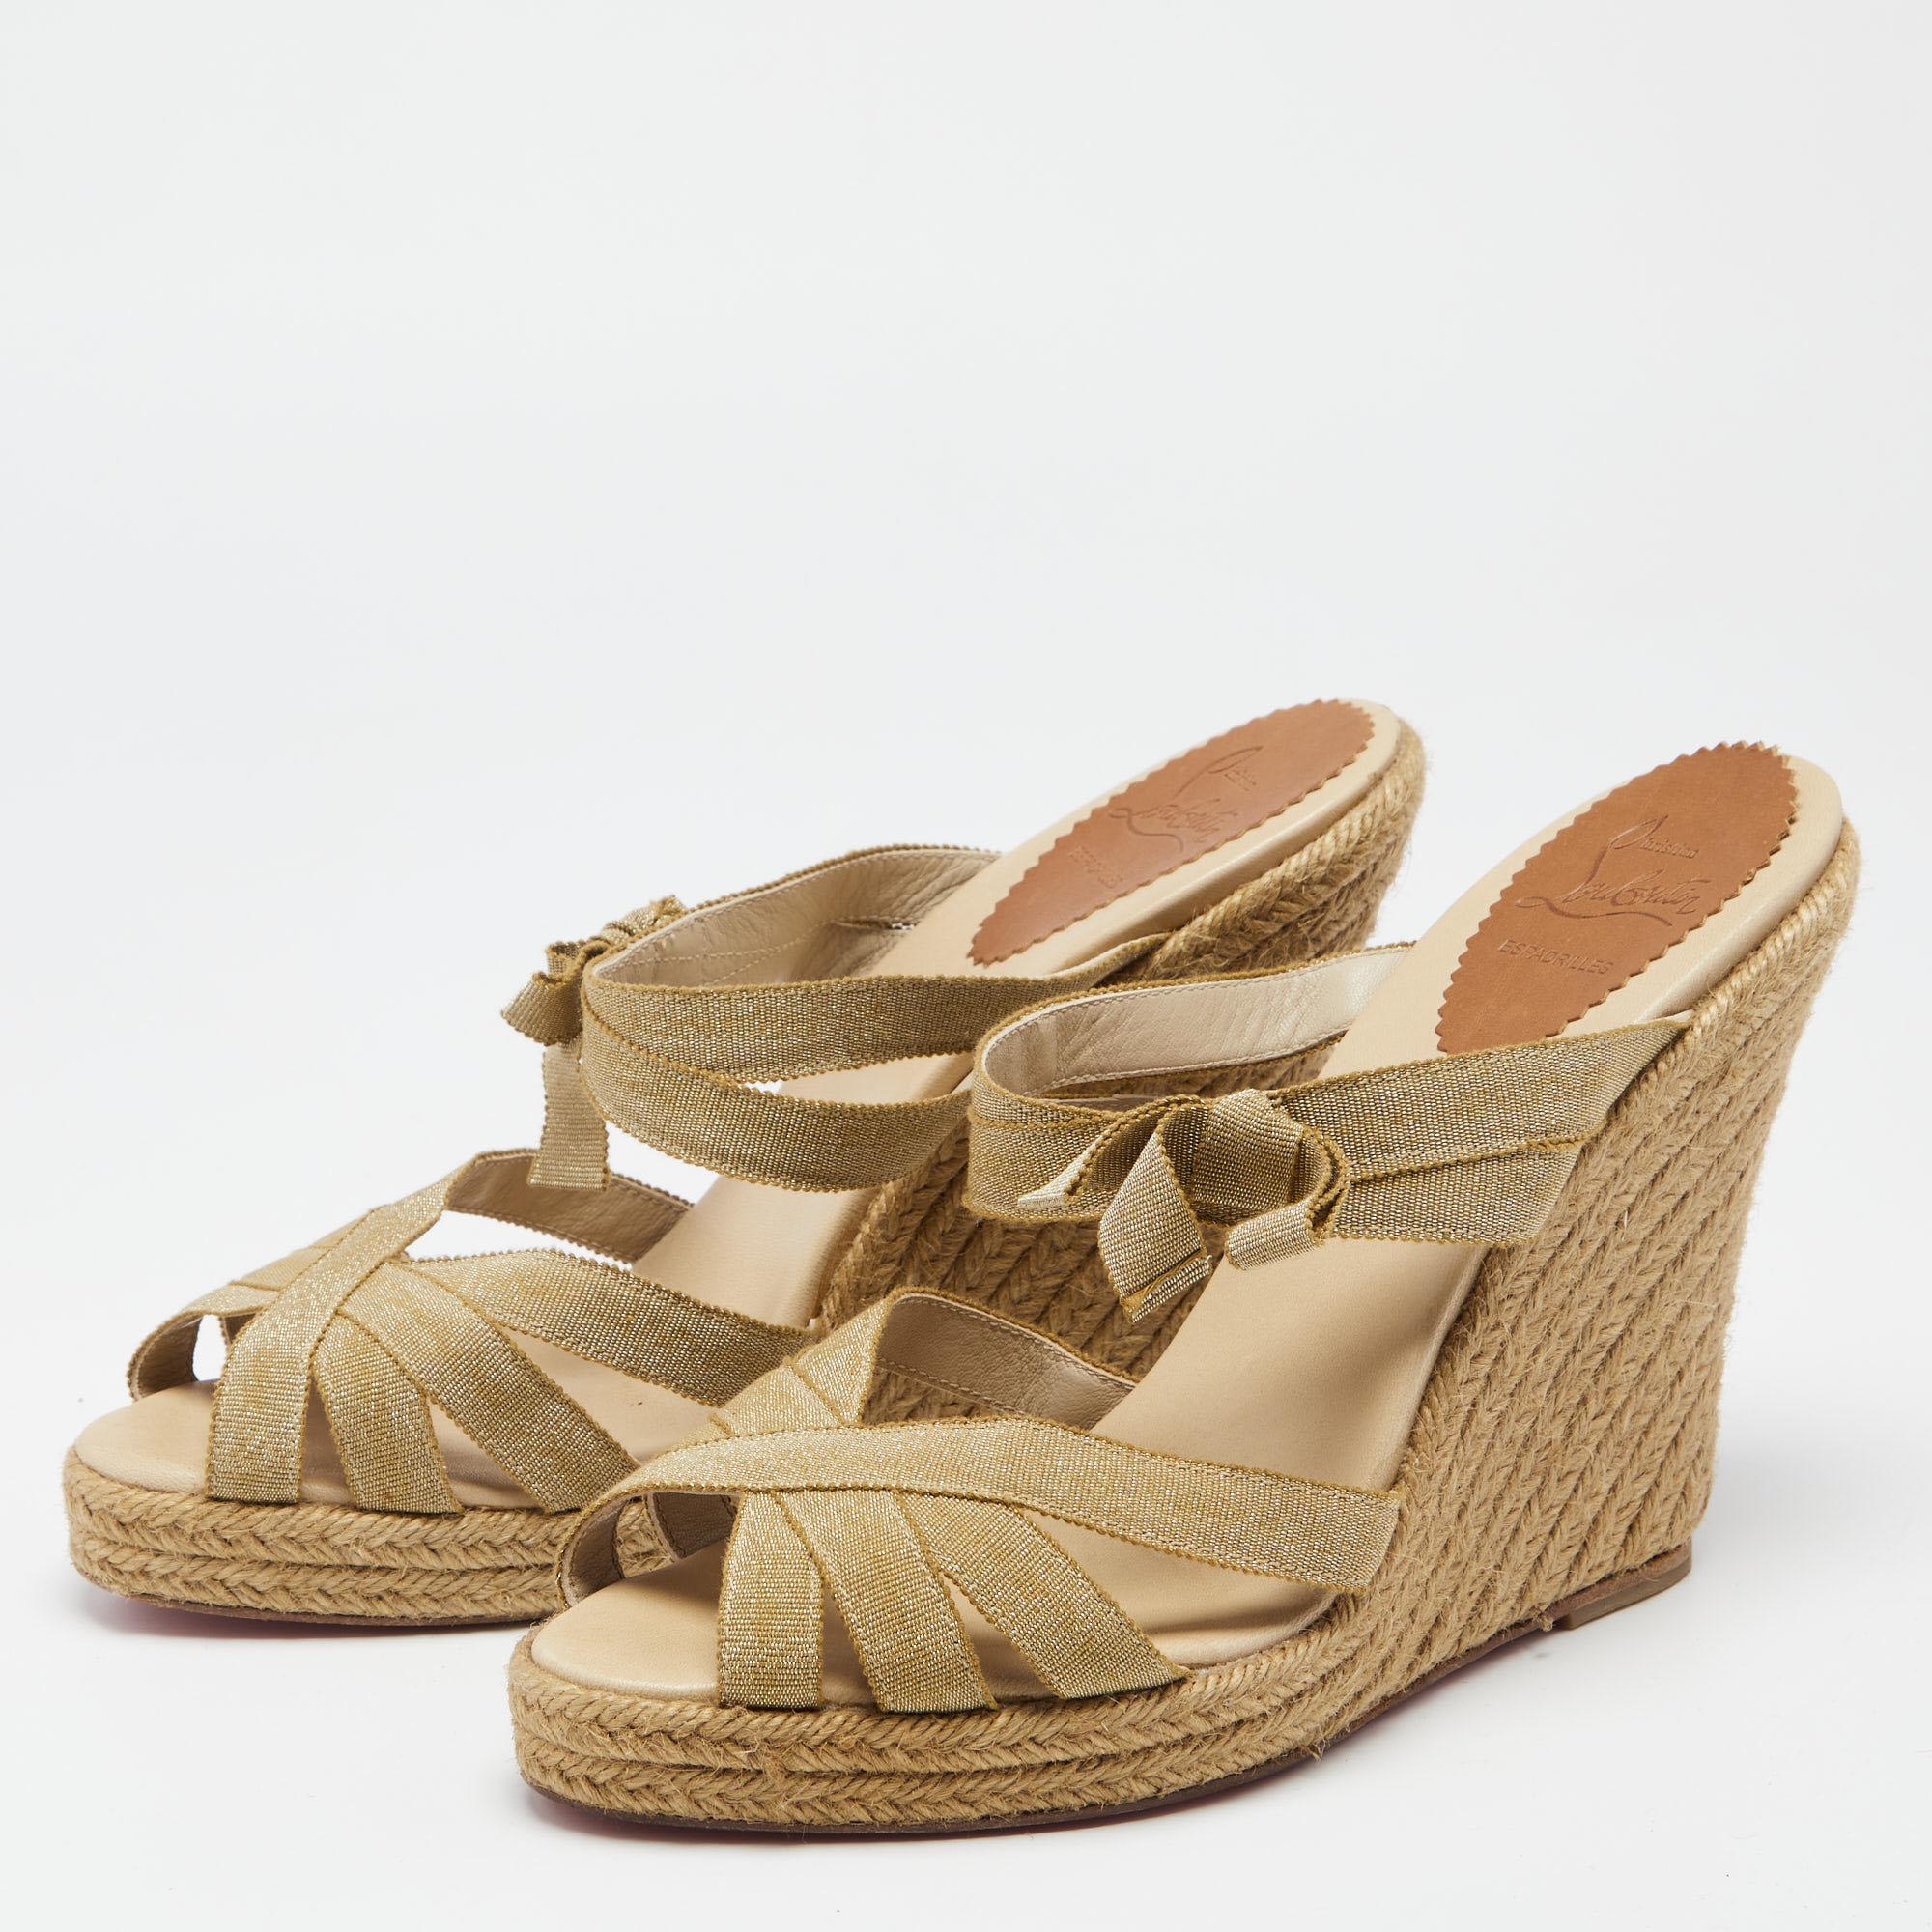 Christian Louboutin brings a perfect pair for the summer season! These sandals come with a gold-hued strappy upper that will frame your feet in the most elegant way. The espadrille wedge heels are supported by platforms for the comfort of your